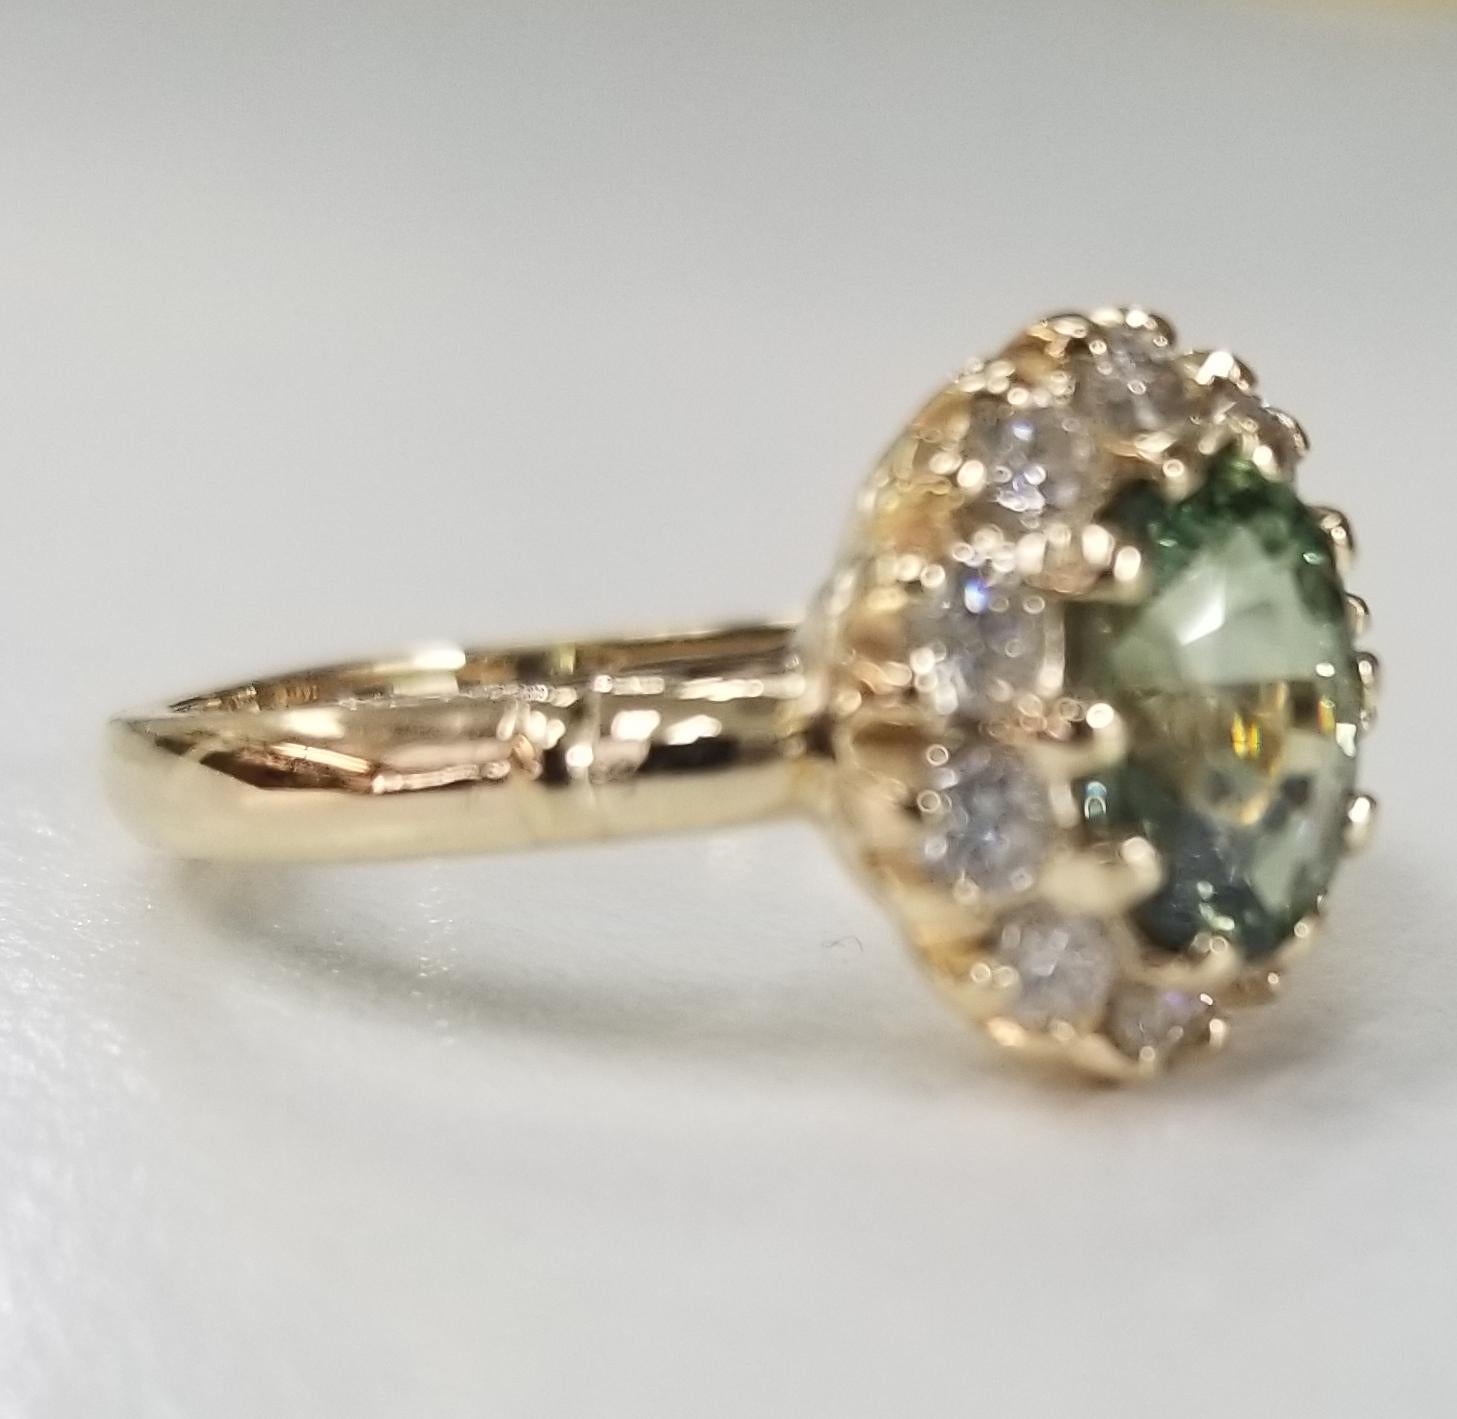 14 karat yellow gold Green Sapphire diamond halo ring, containing 1 oval green sapphire of gem quality weighing 1.92cts.  and 10 round full cut diamonds of very fine quality weighing .55pts.  This ring is a size 7 but we will size to fit for free.